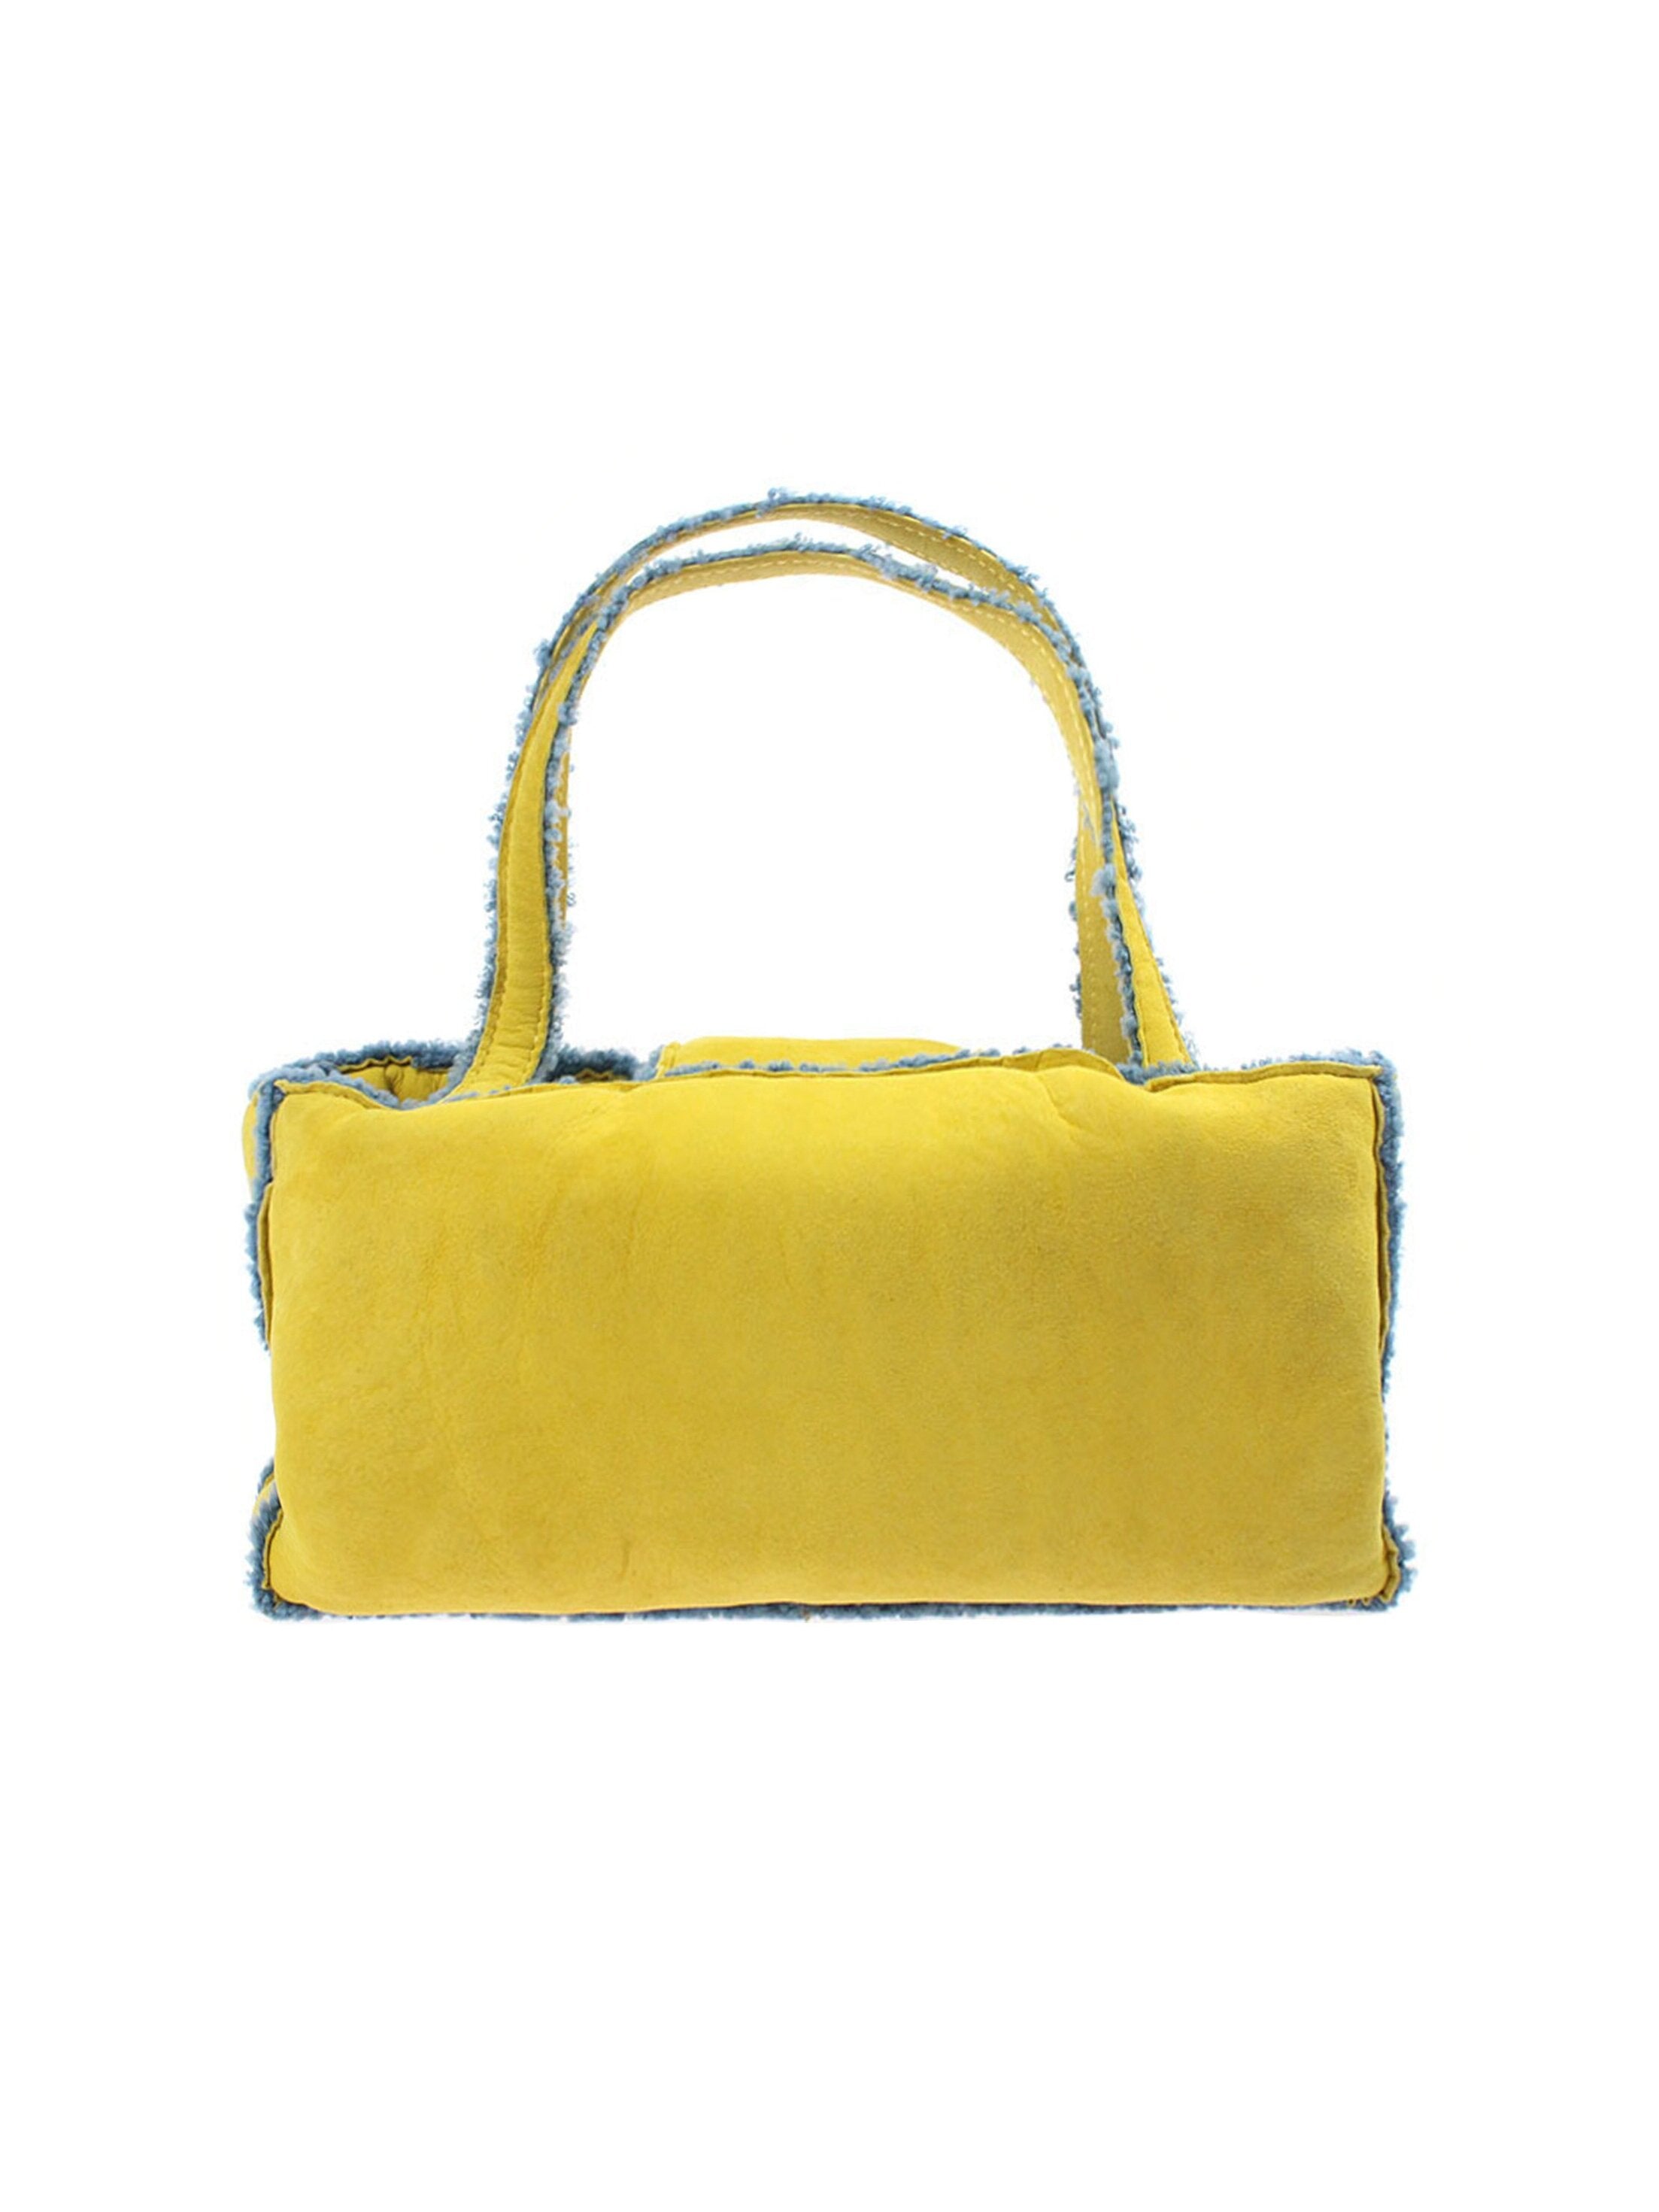 Chanel 2010s Rare Mouton Yellow and Blue Small Tote